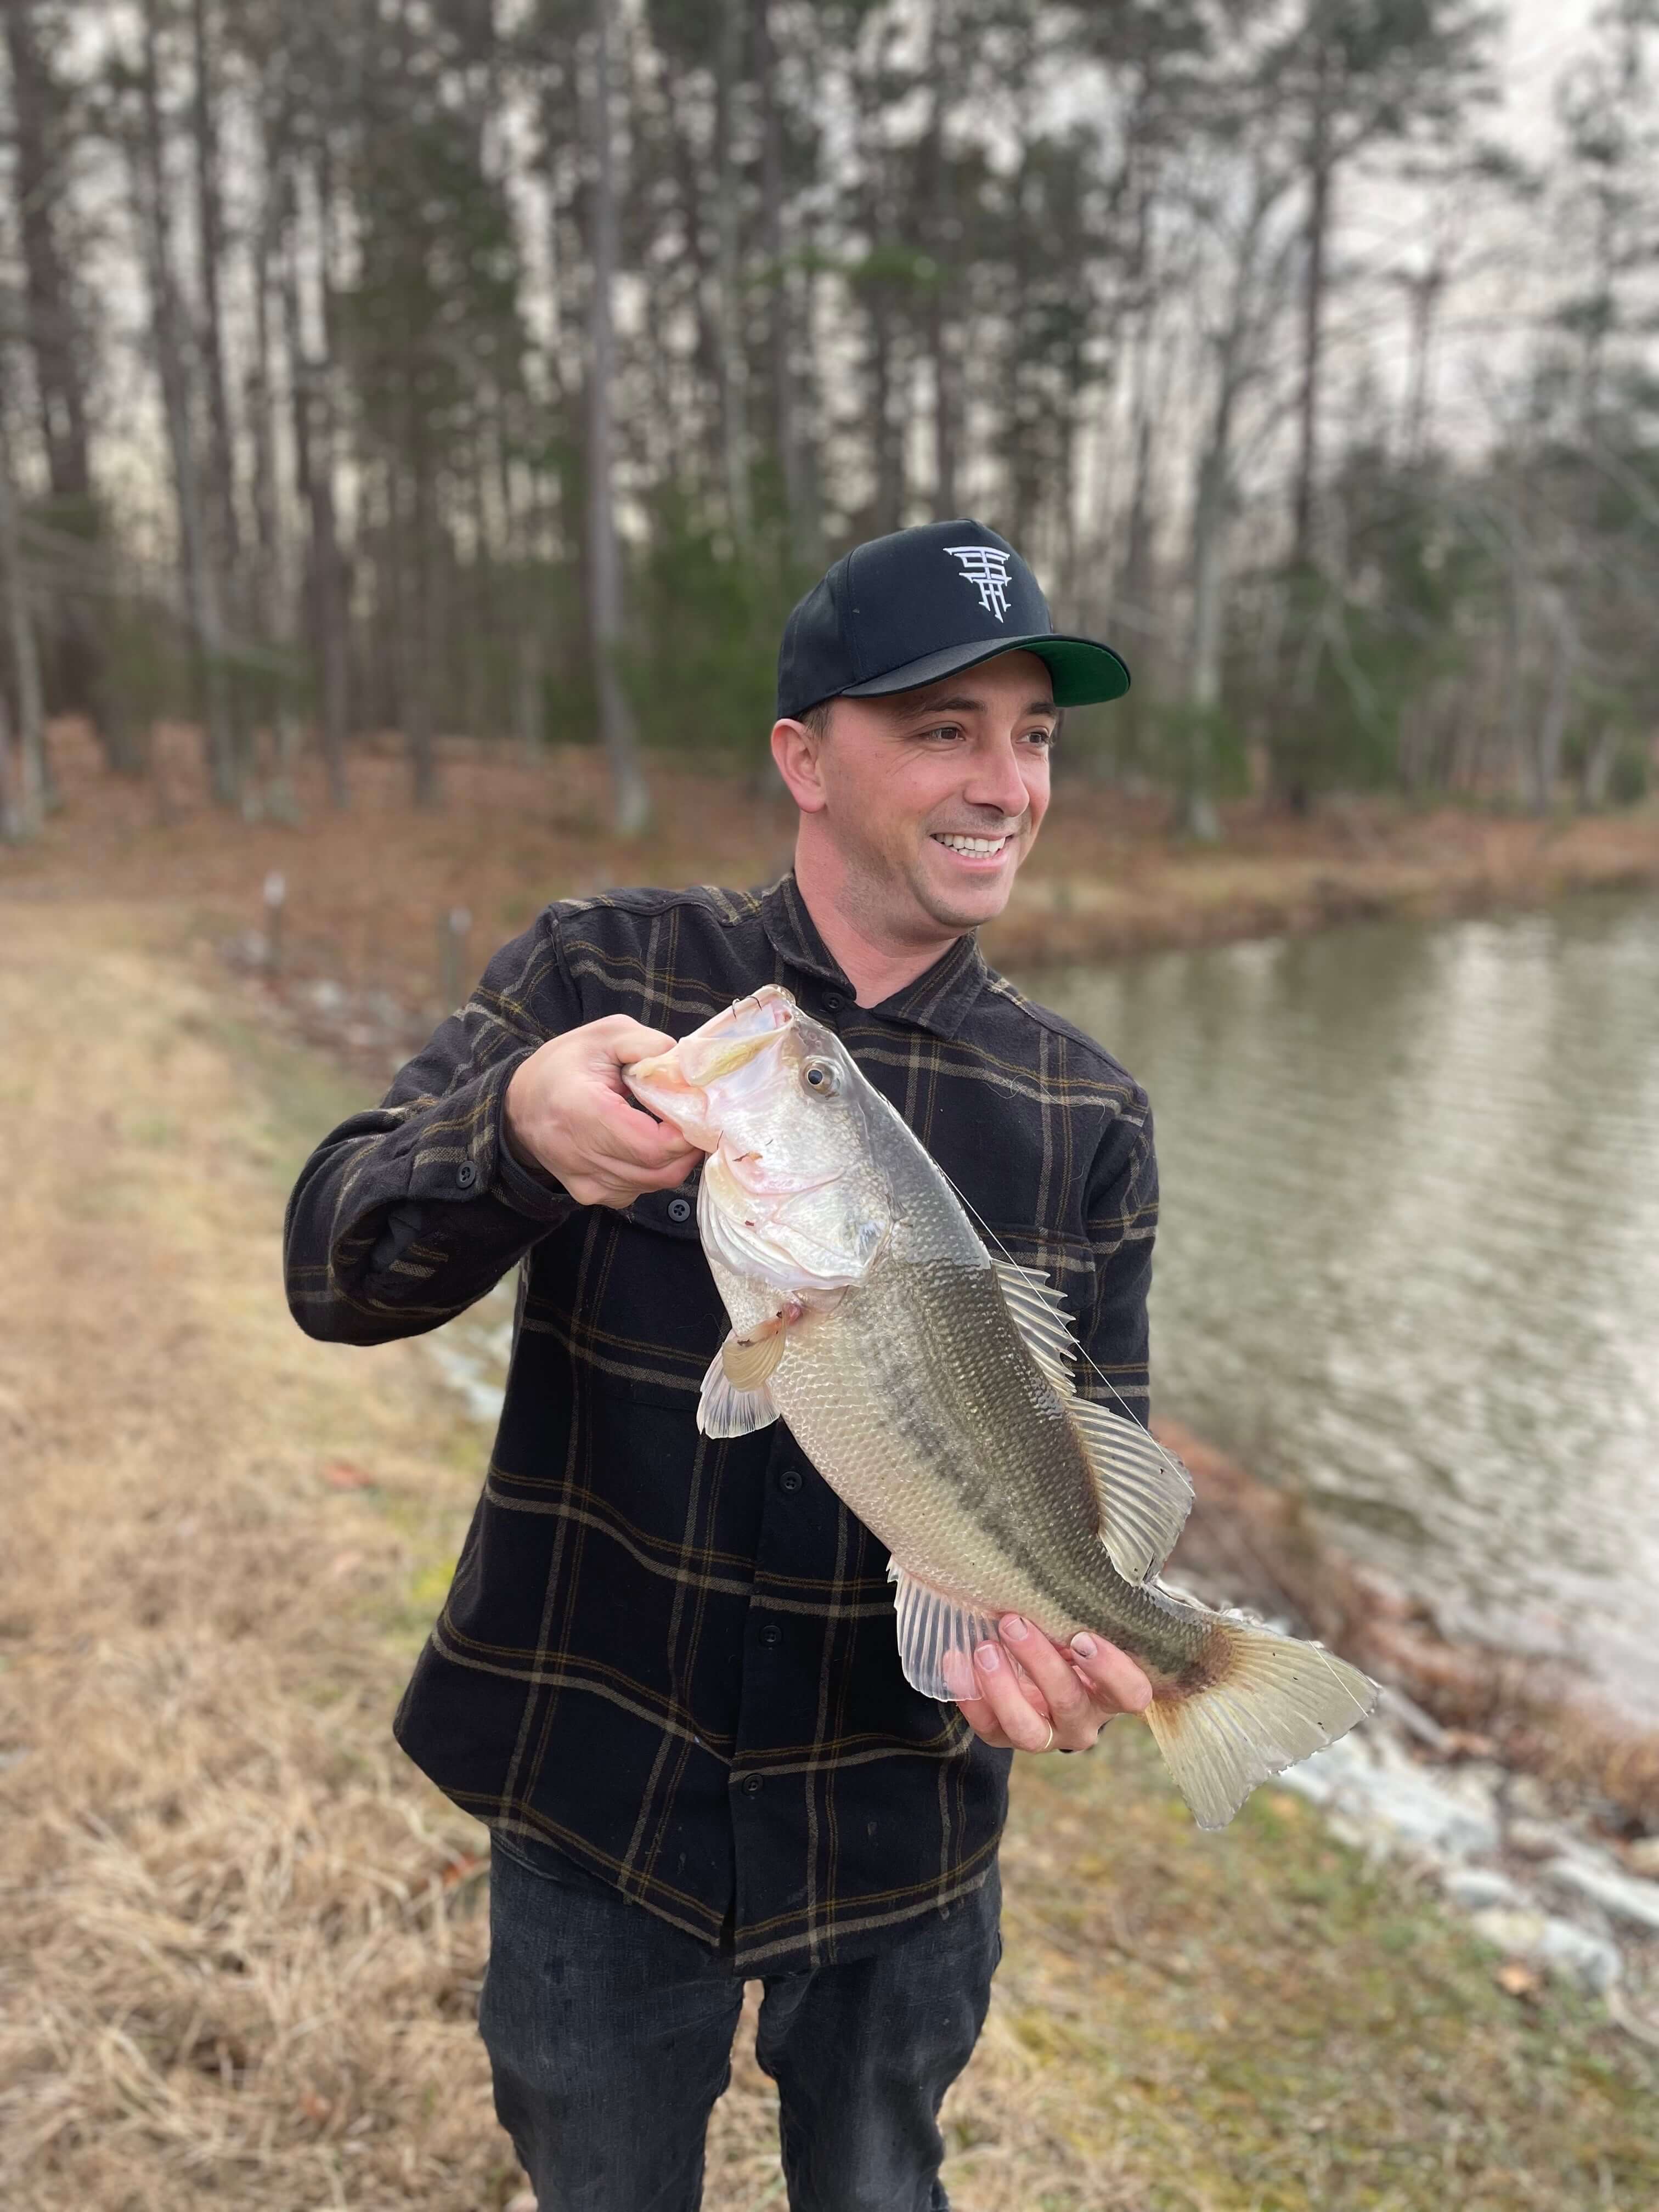 Photo of Target Species Acquired founder, John Prioli. John is smiling and holding a 5 lbs bass.